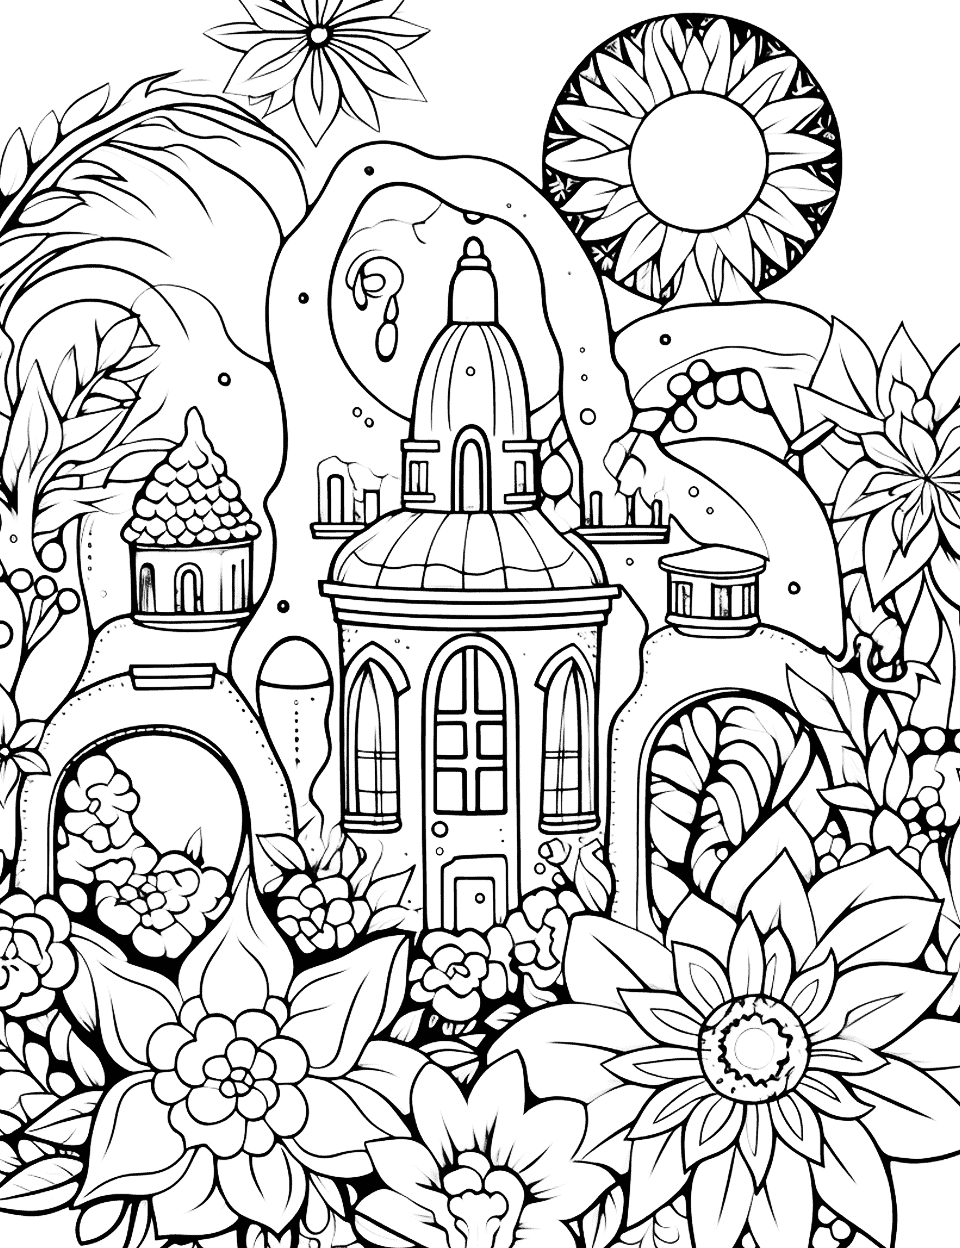 Galaxy Garden Adult Coloring Page - An imaginative garden in space with alien plants.